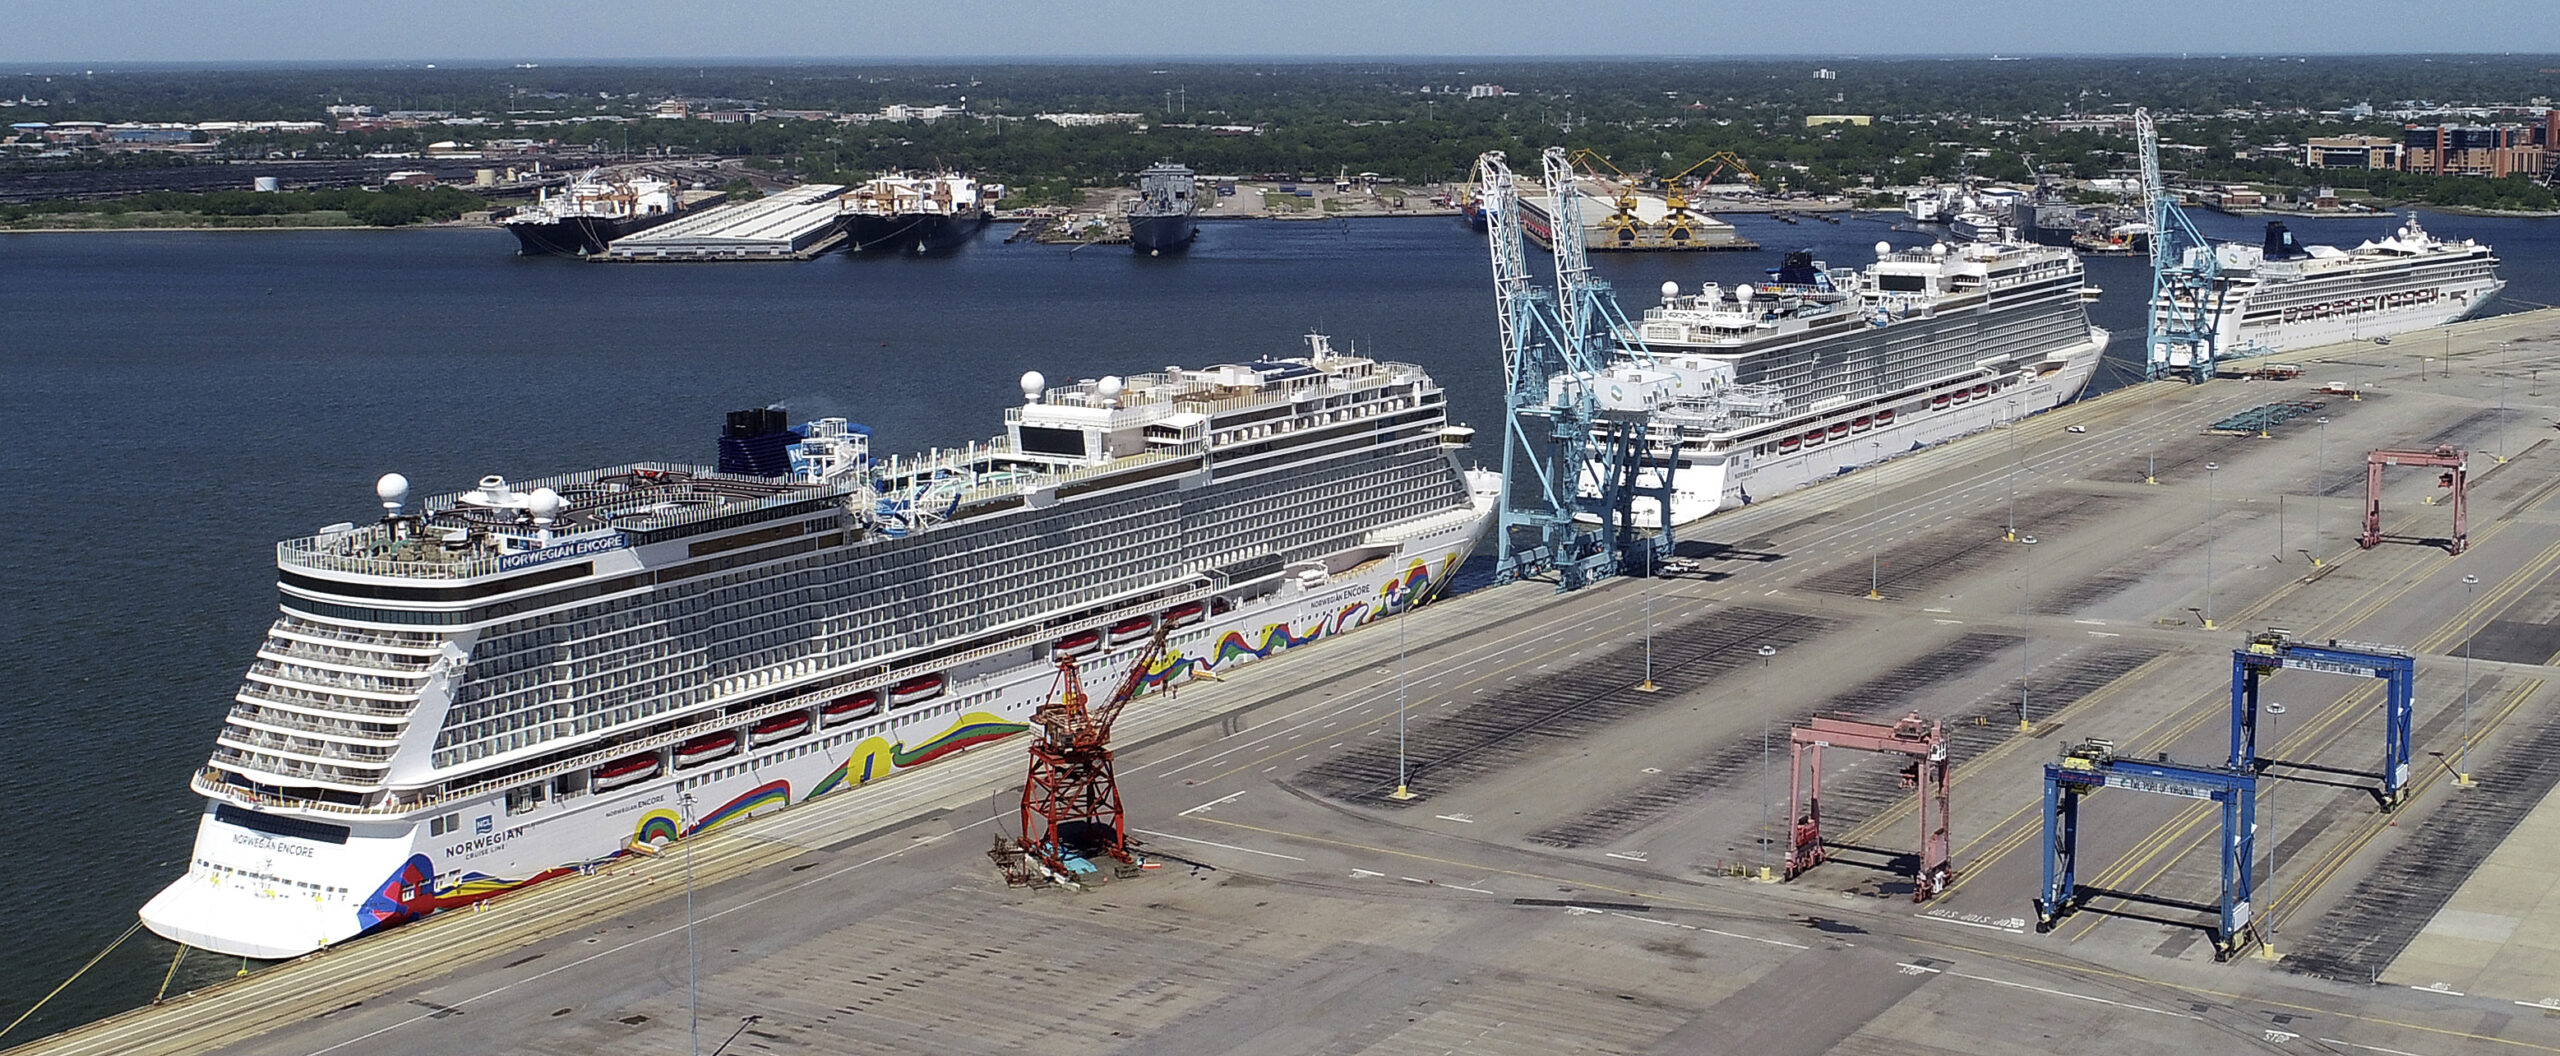 FILE - In this May 4, 2020 file photo, Norwegian cruise ships are docked at Portsmouth Marine Terminal in Portsmouth, Va. Norwegian Cruise Lines is threatening to skip Florida ports because of the governor's order banning businesses from requiring that customers be vaccinated against COVID-19. The company says Gov. Ron DeSantis' order conflicts with guidelines from federal health authorities that would let cruise ships sail in U.S. waters if passengers and crew members are vaccinated. (Stephen M. Katz/The Virginian-Pilot via AP, File)